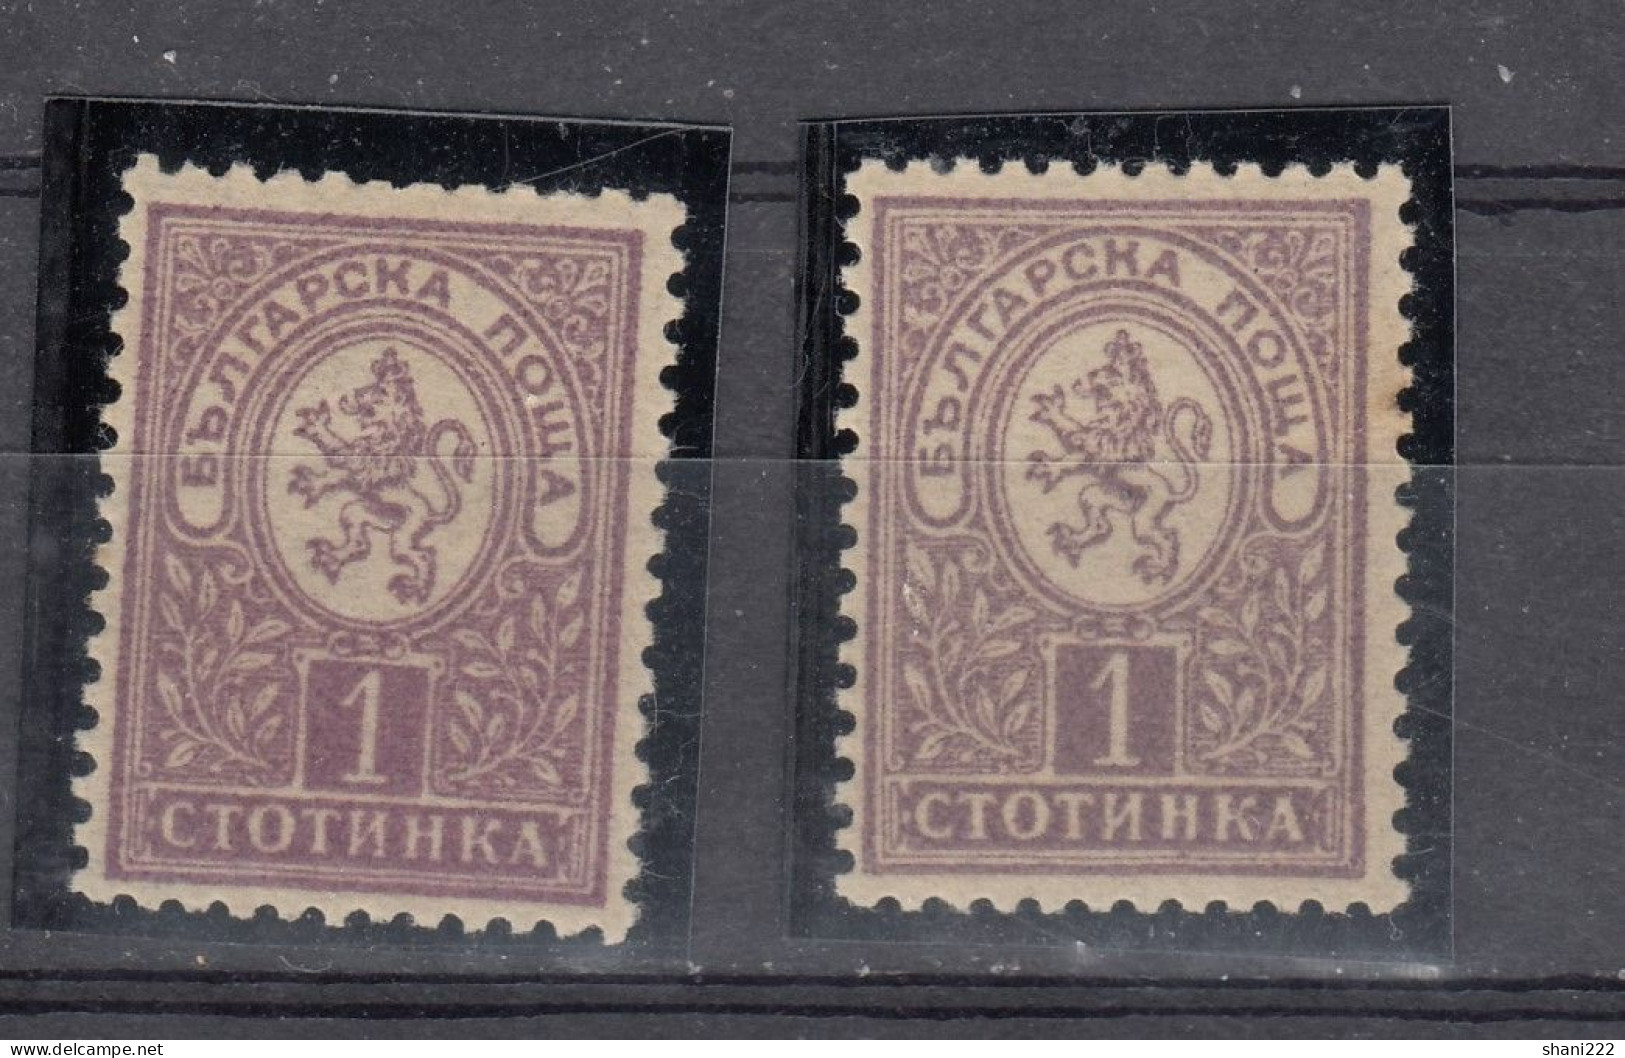 Bulgaria 1889 Lion - 1 St. 2 Copies Of Different Shades - MNH (e-589) - Unused Stamps